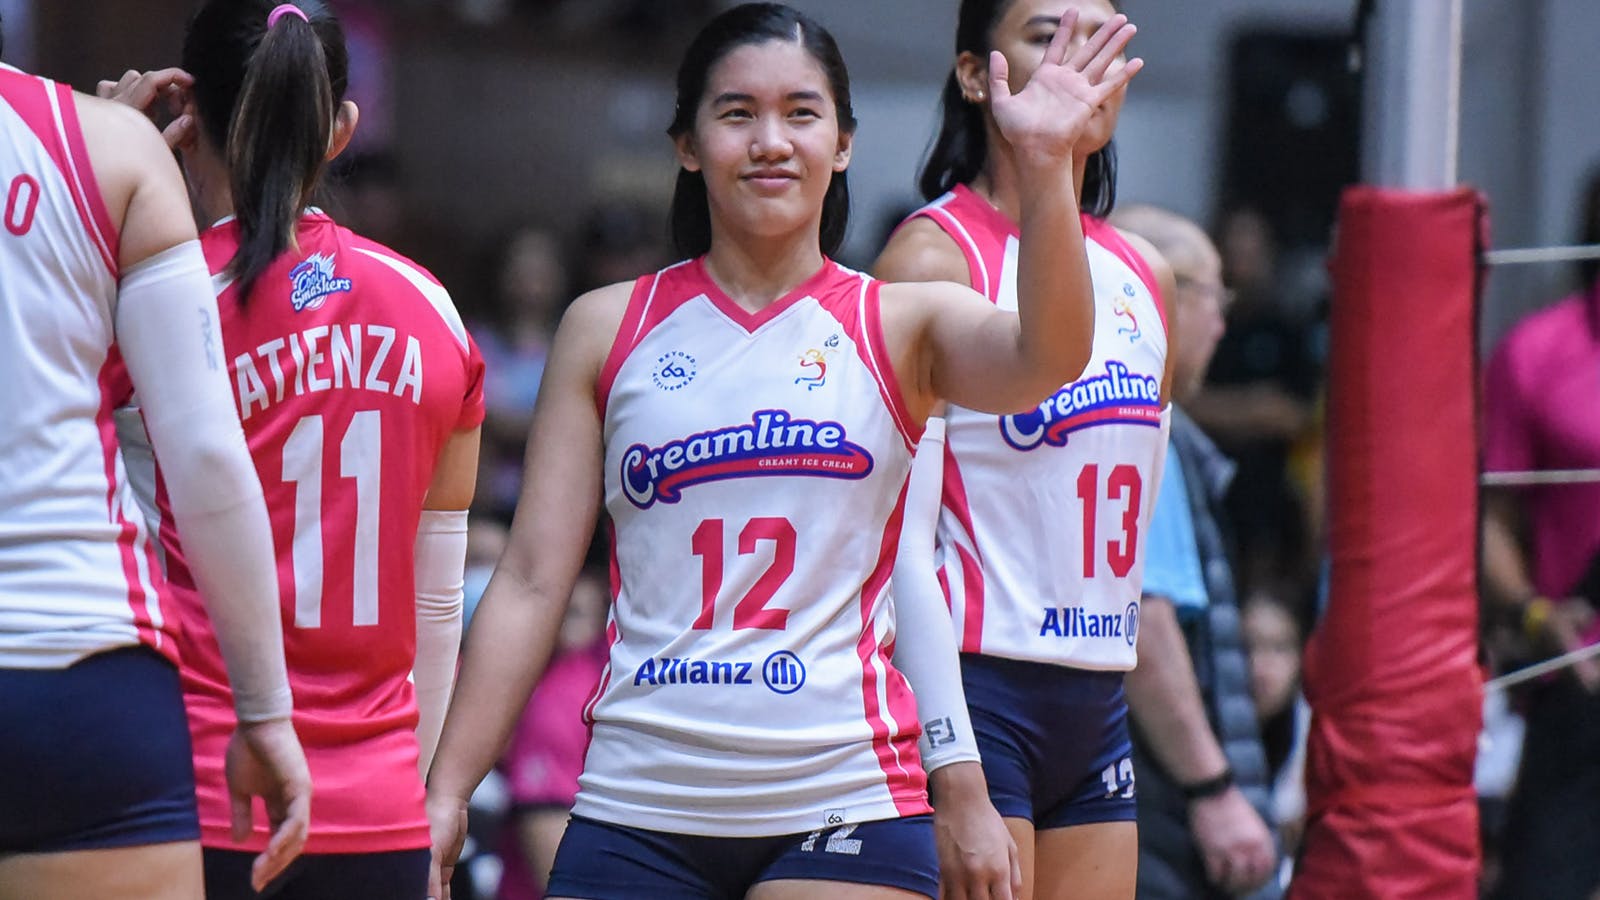 Creamline looking to stay hungry going into semis, says Jia De Guzman